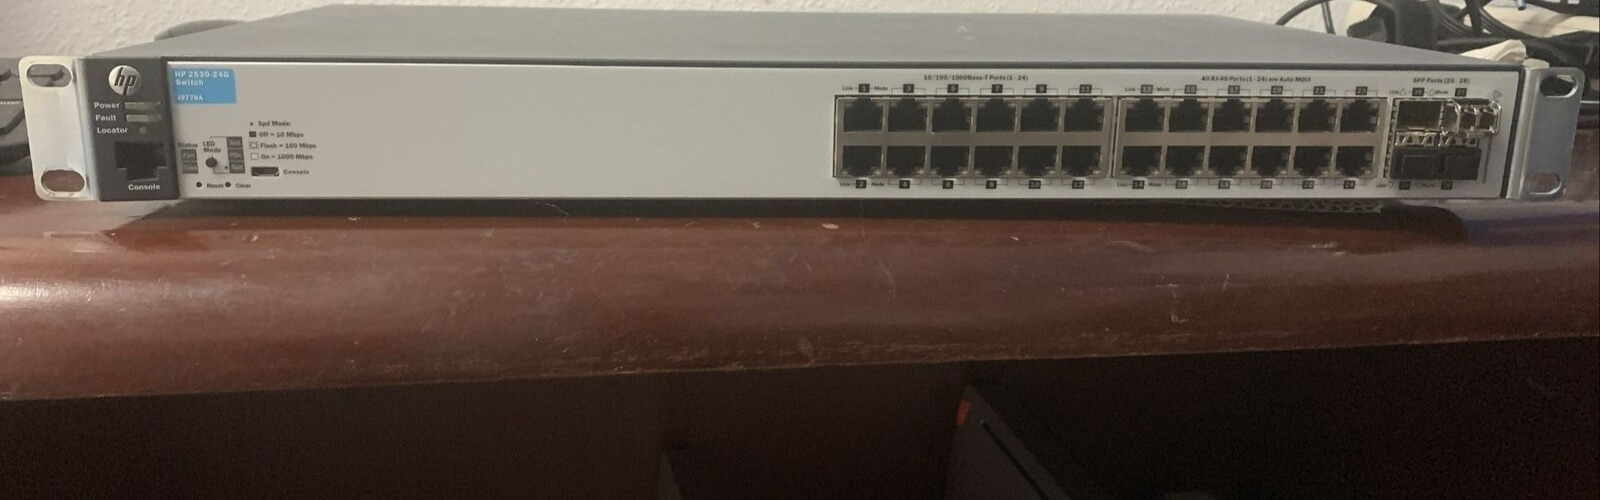 Sale HP 2530-24G  Gigabit Network Switch J9776A / Tested and working